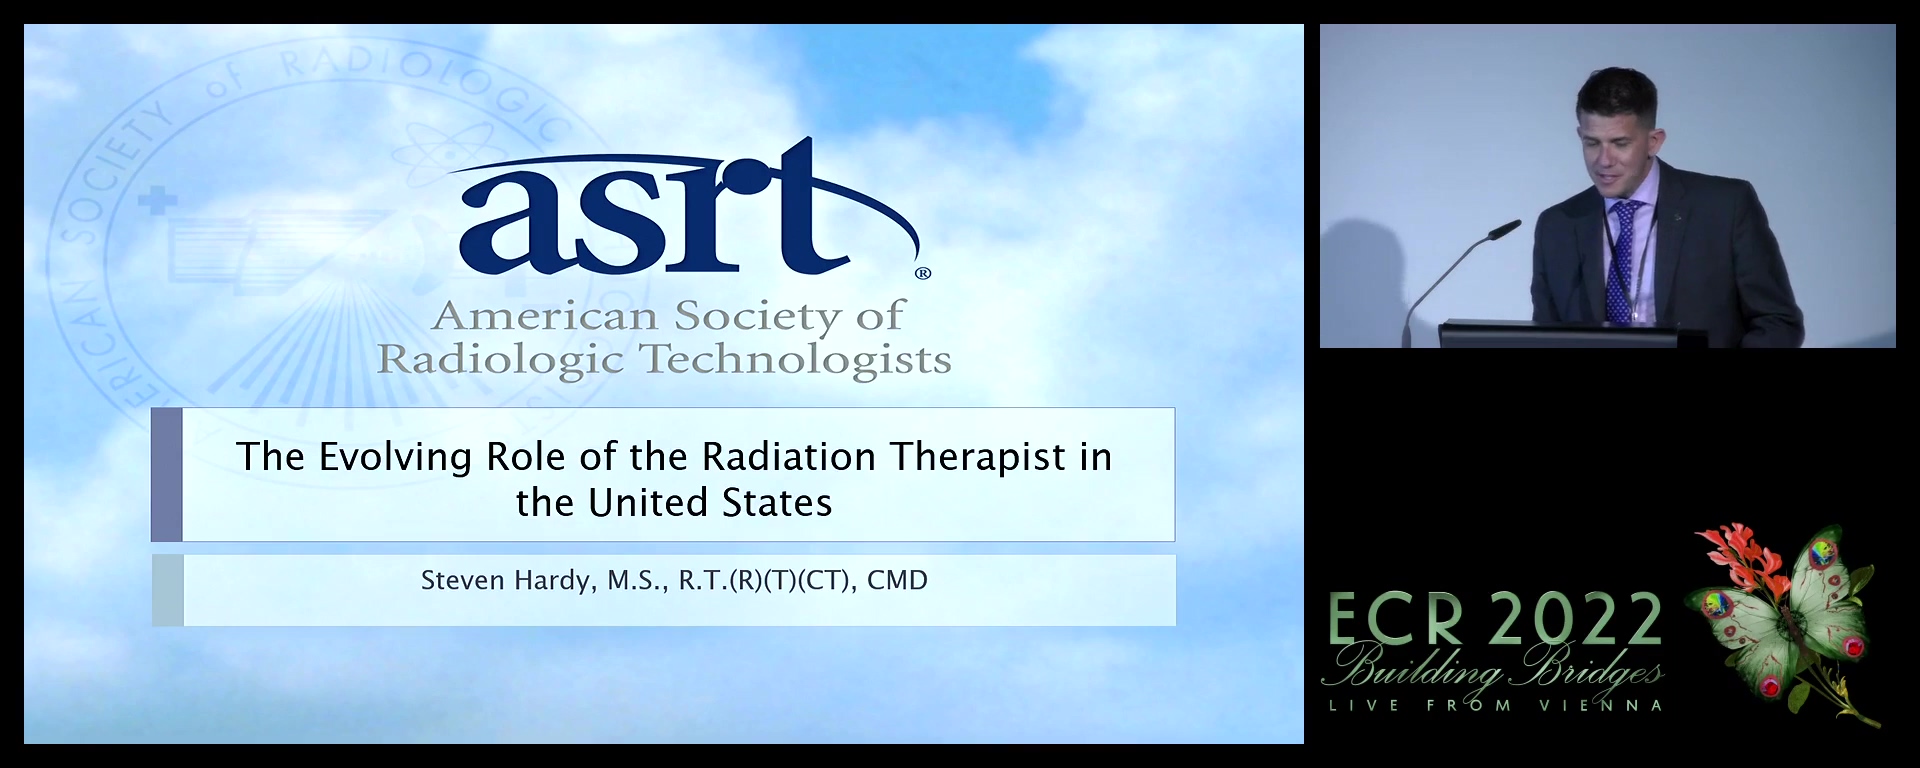 The evolving role of the radiation therapist in the United States